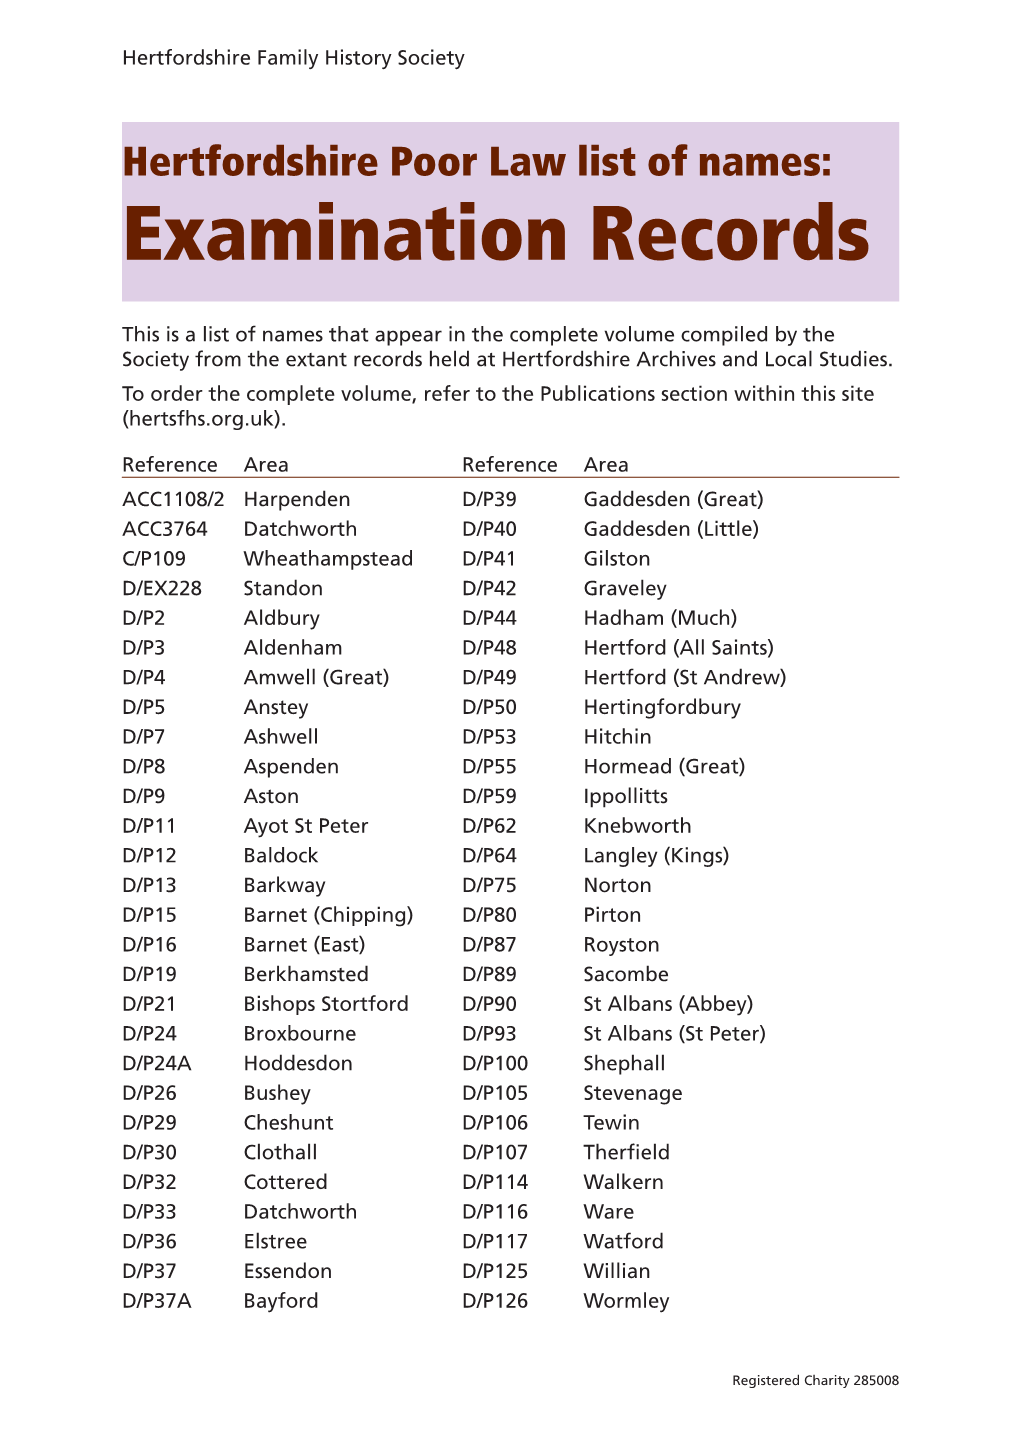 Hertfordshire Poor Law List of Names: Examination Records